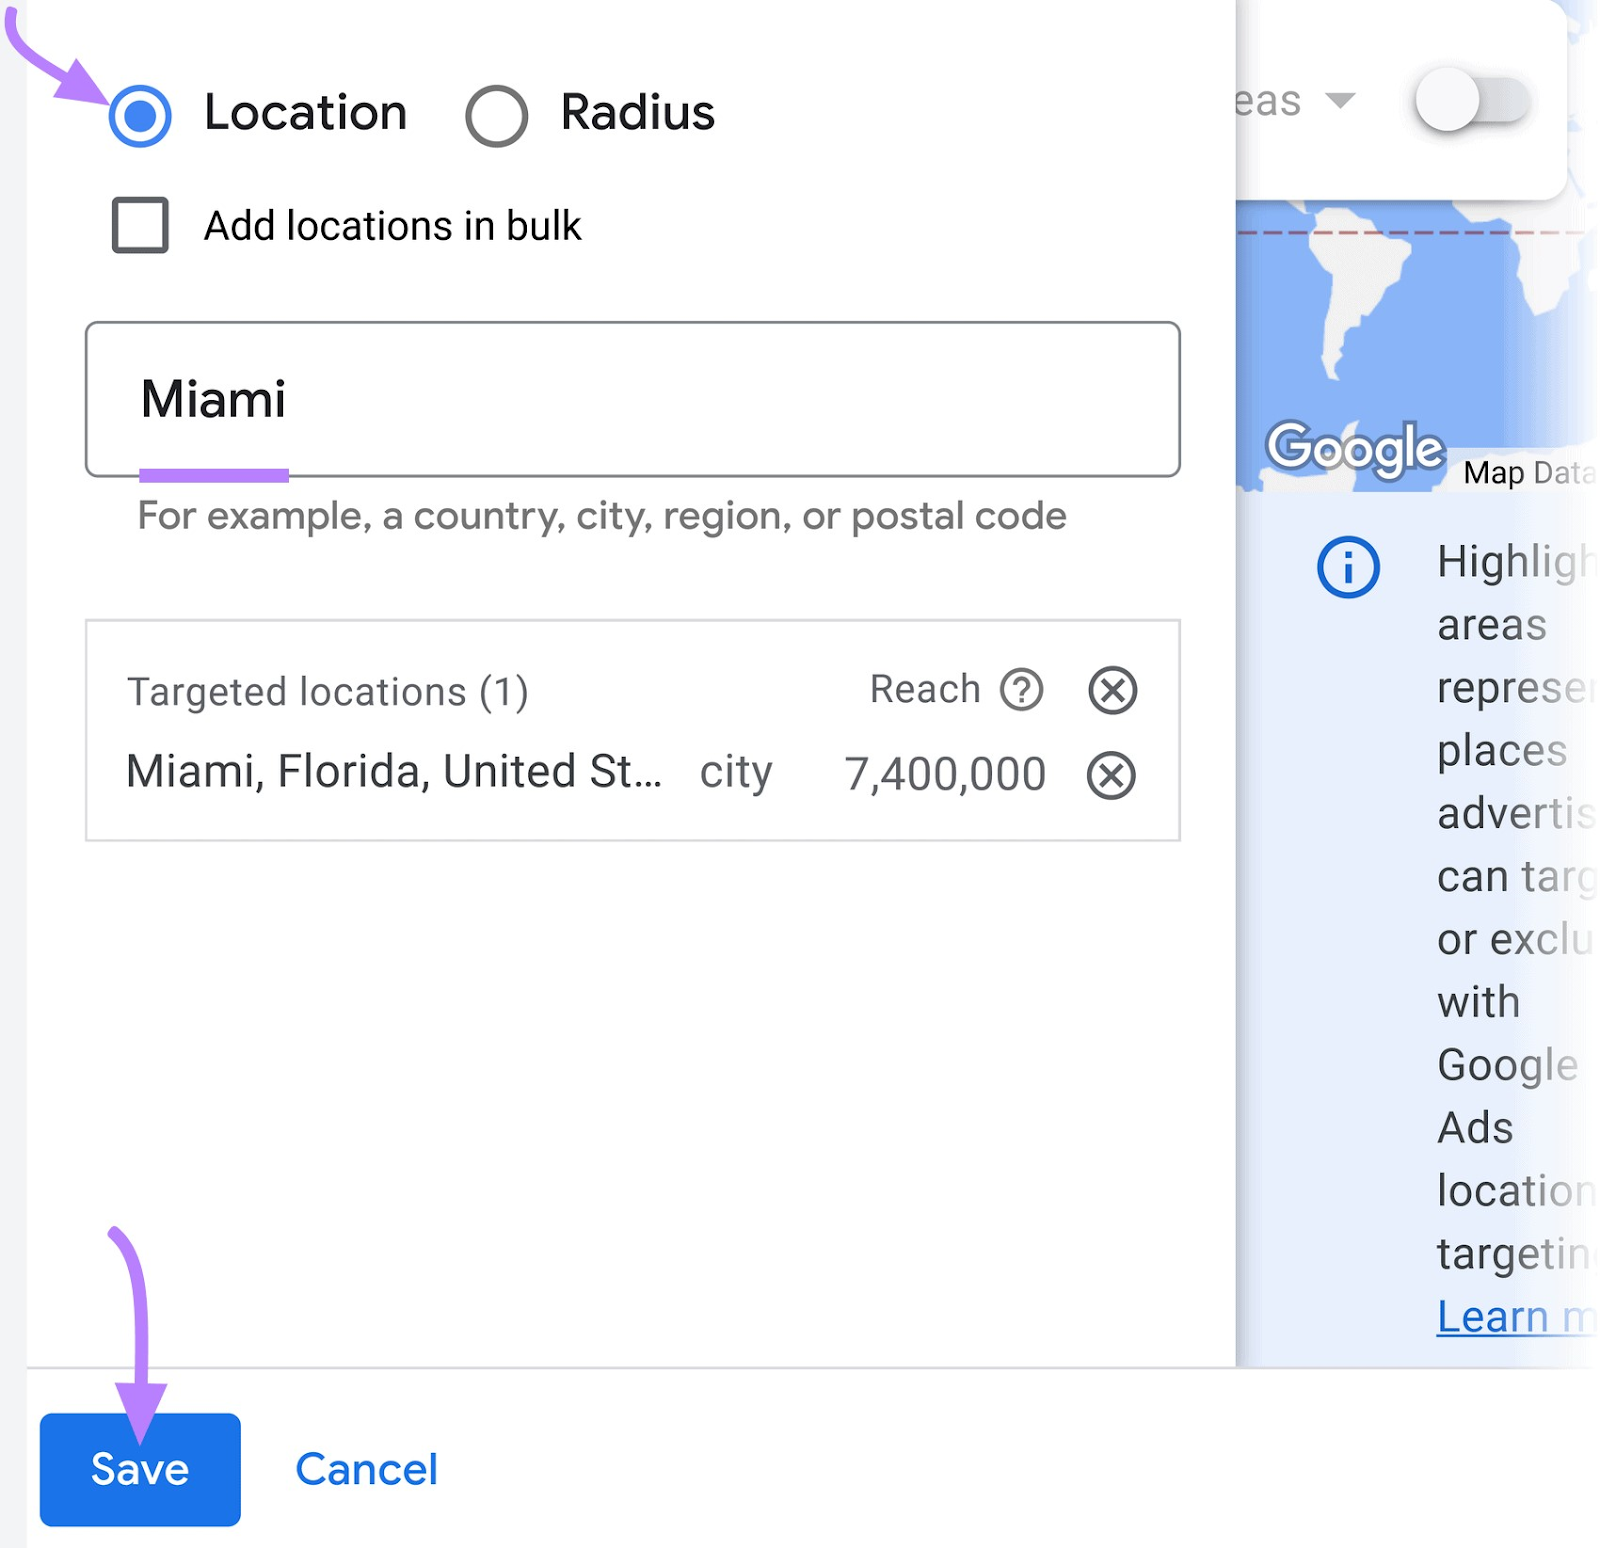 "Miami" entered under the Location tab